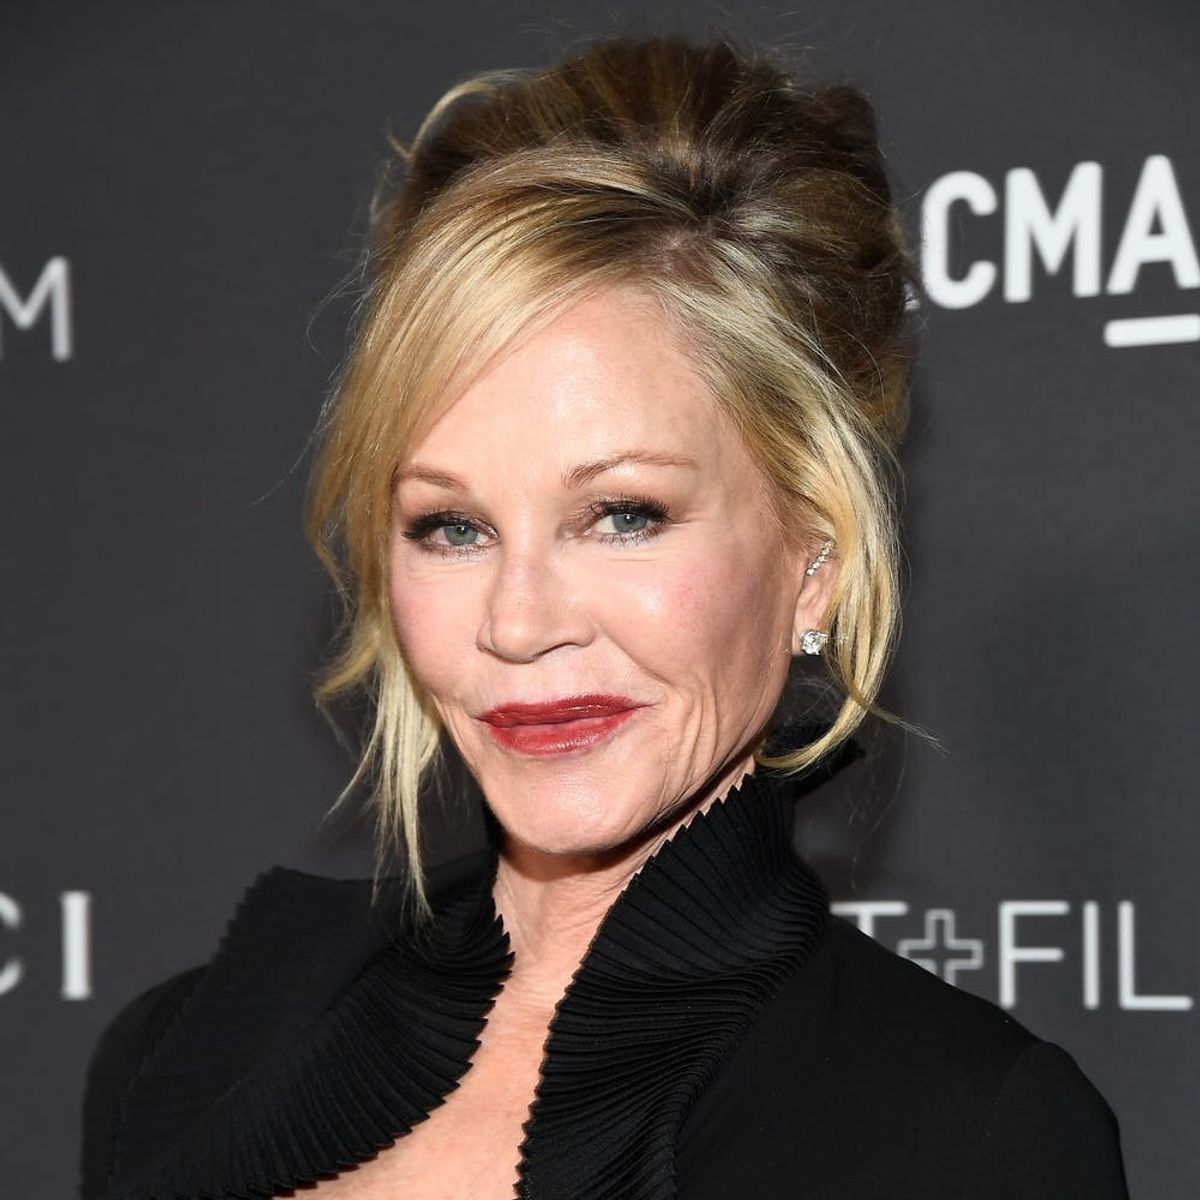 Melanie Griffith Reveals Epilepsy Diagnosis She Kept Private for Years